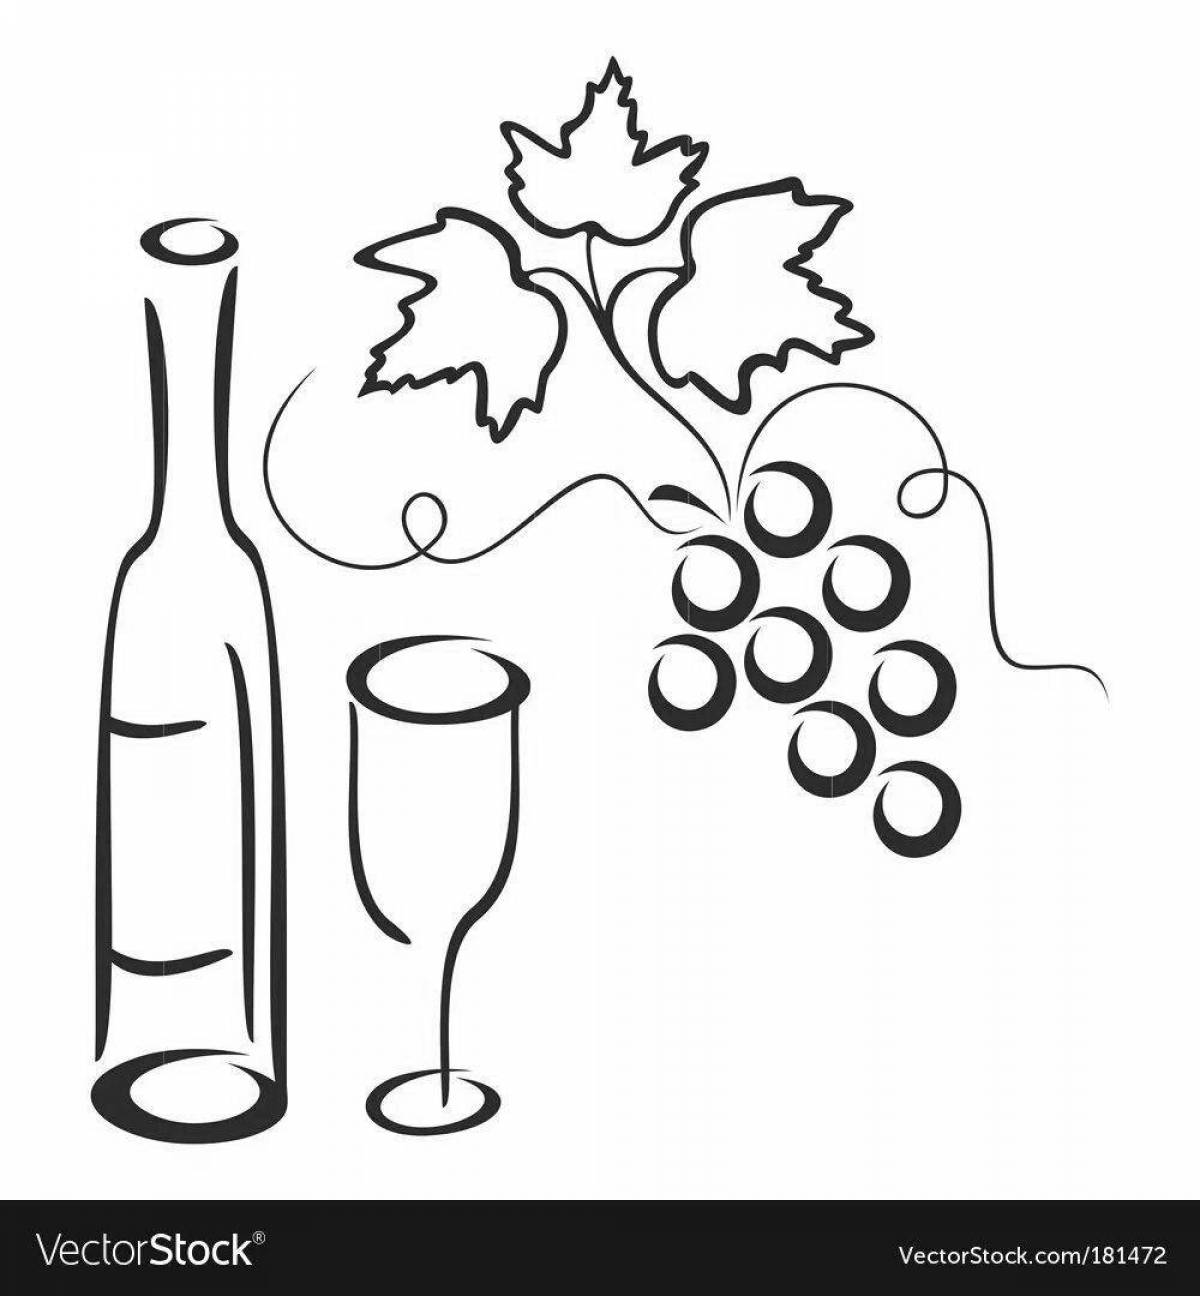 Intriguing wine coloring page